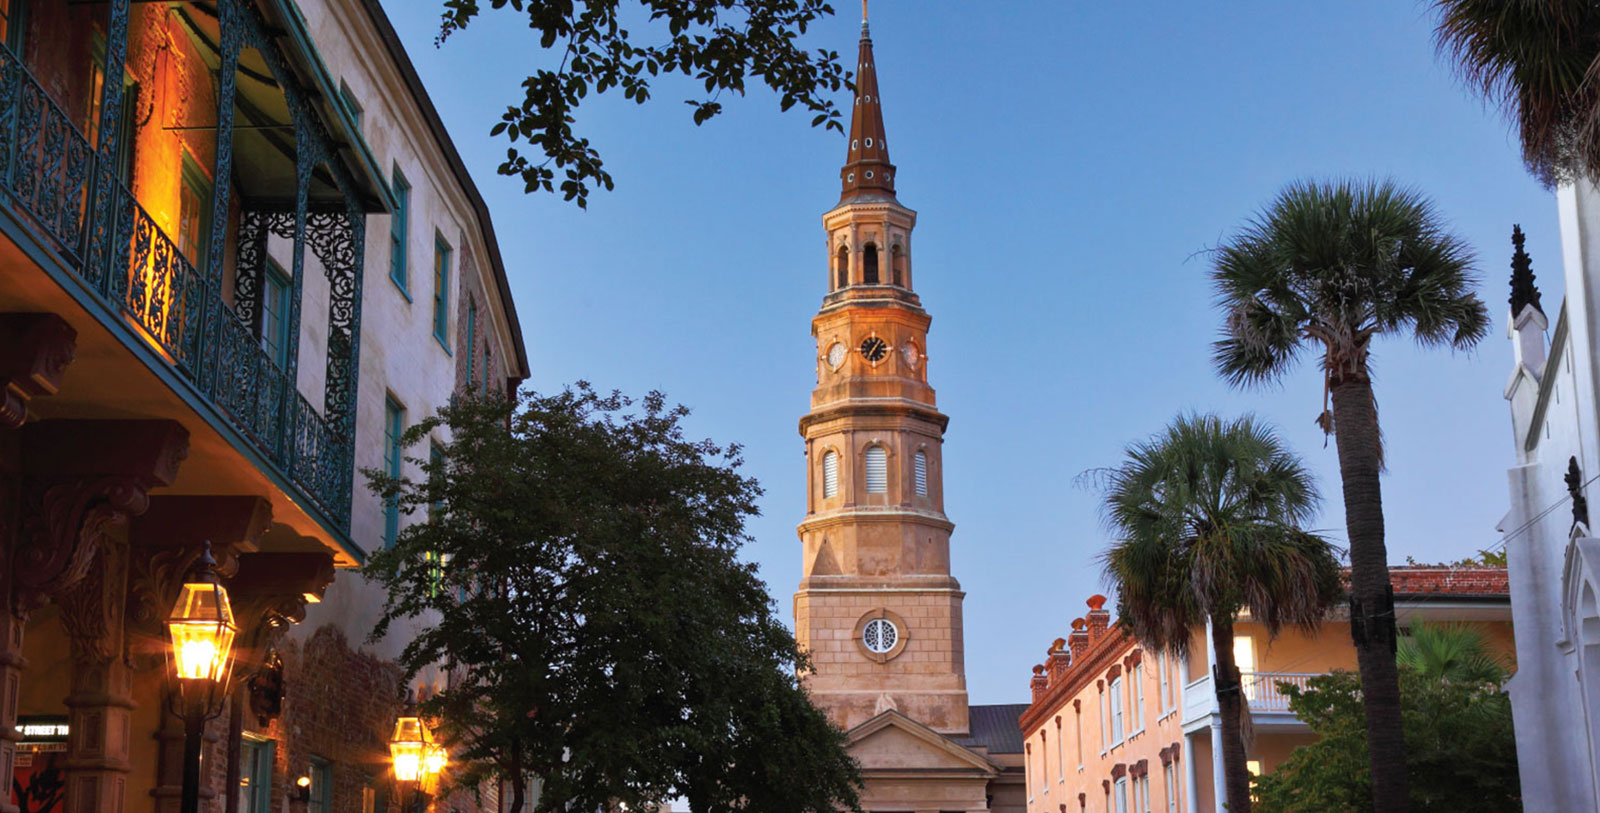 Experience landmarks like the Gaillard Center and the Wolfe Street Playhouse on a horse-drawn carriage tour of Charleston.